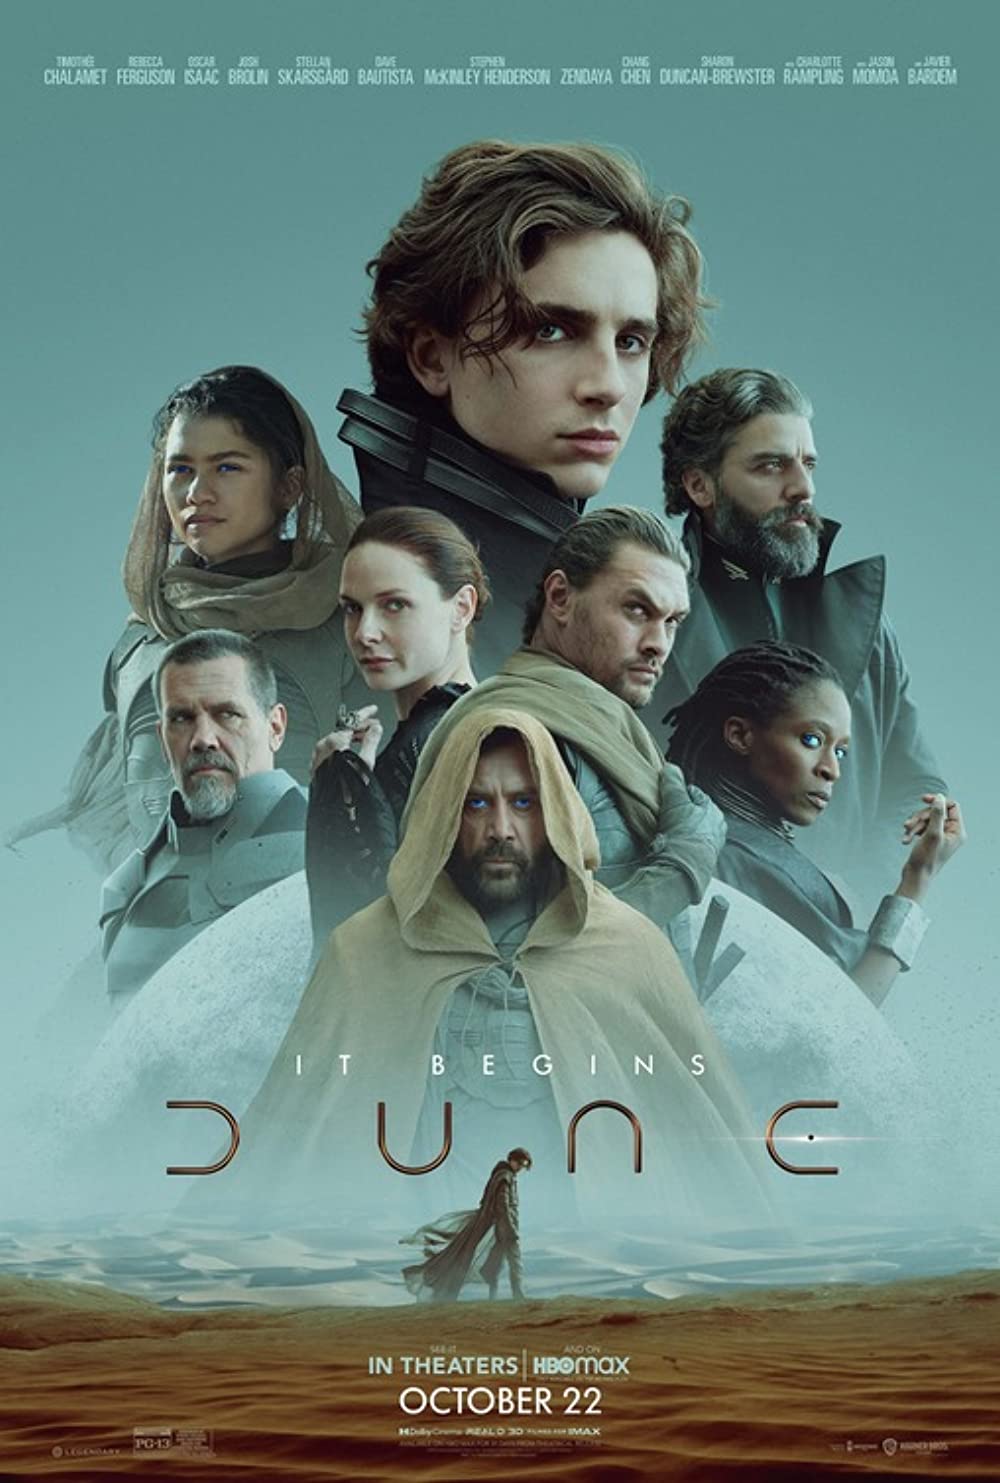 Dune Part One: a Response to Mediocre Blockbusters